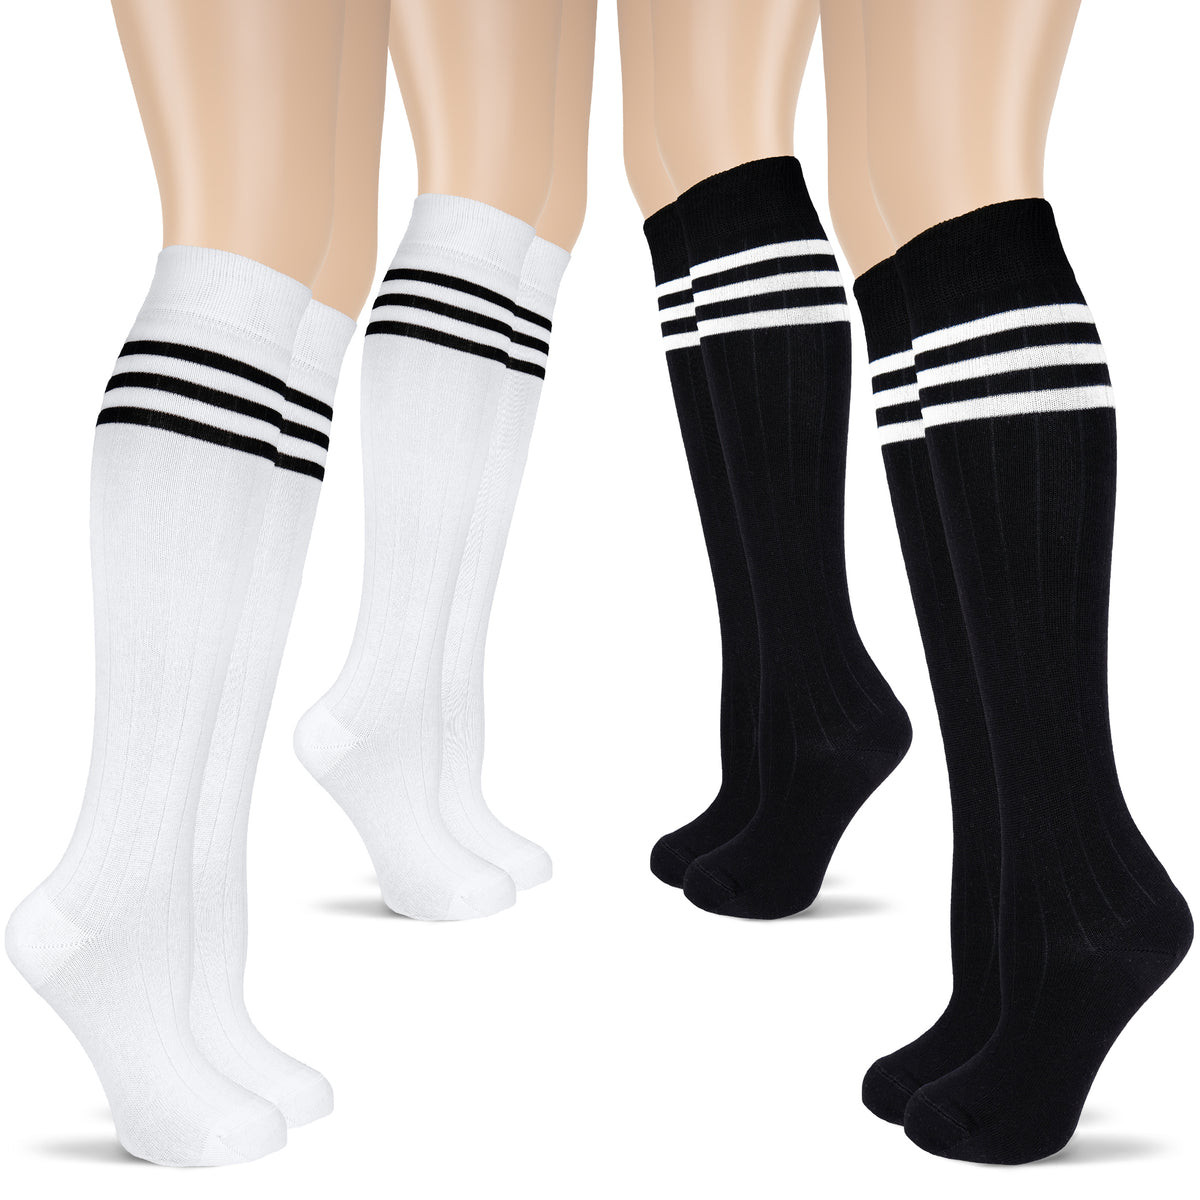 The picture shows four sets of women's knee-high socks, crafted from cotton. The socks are available in black striped white and white striped black patterns.